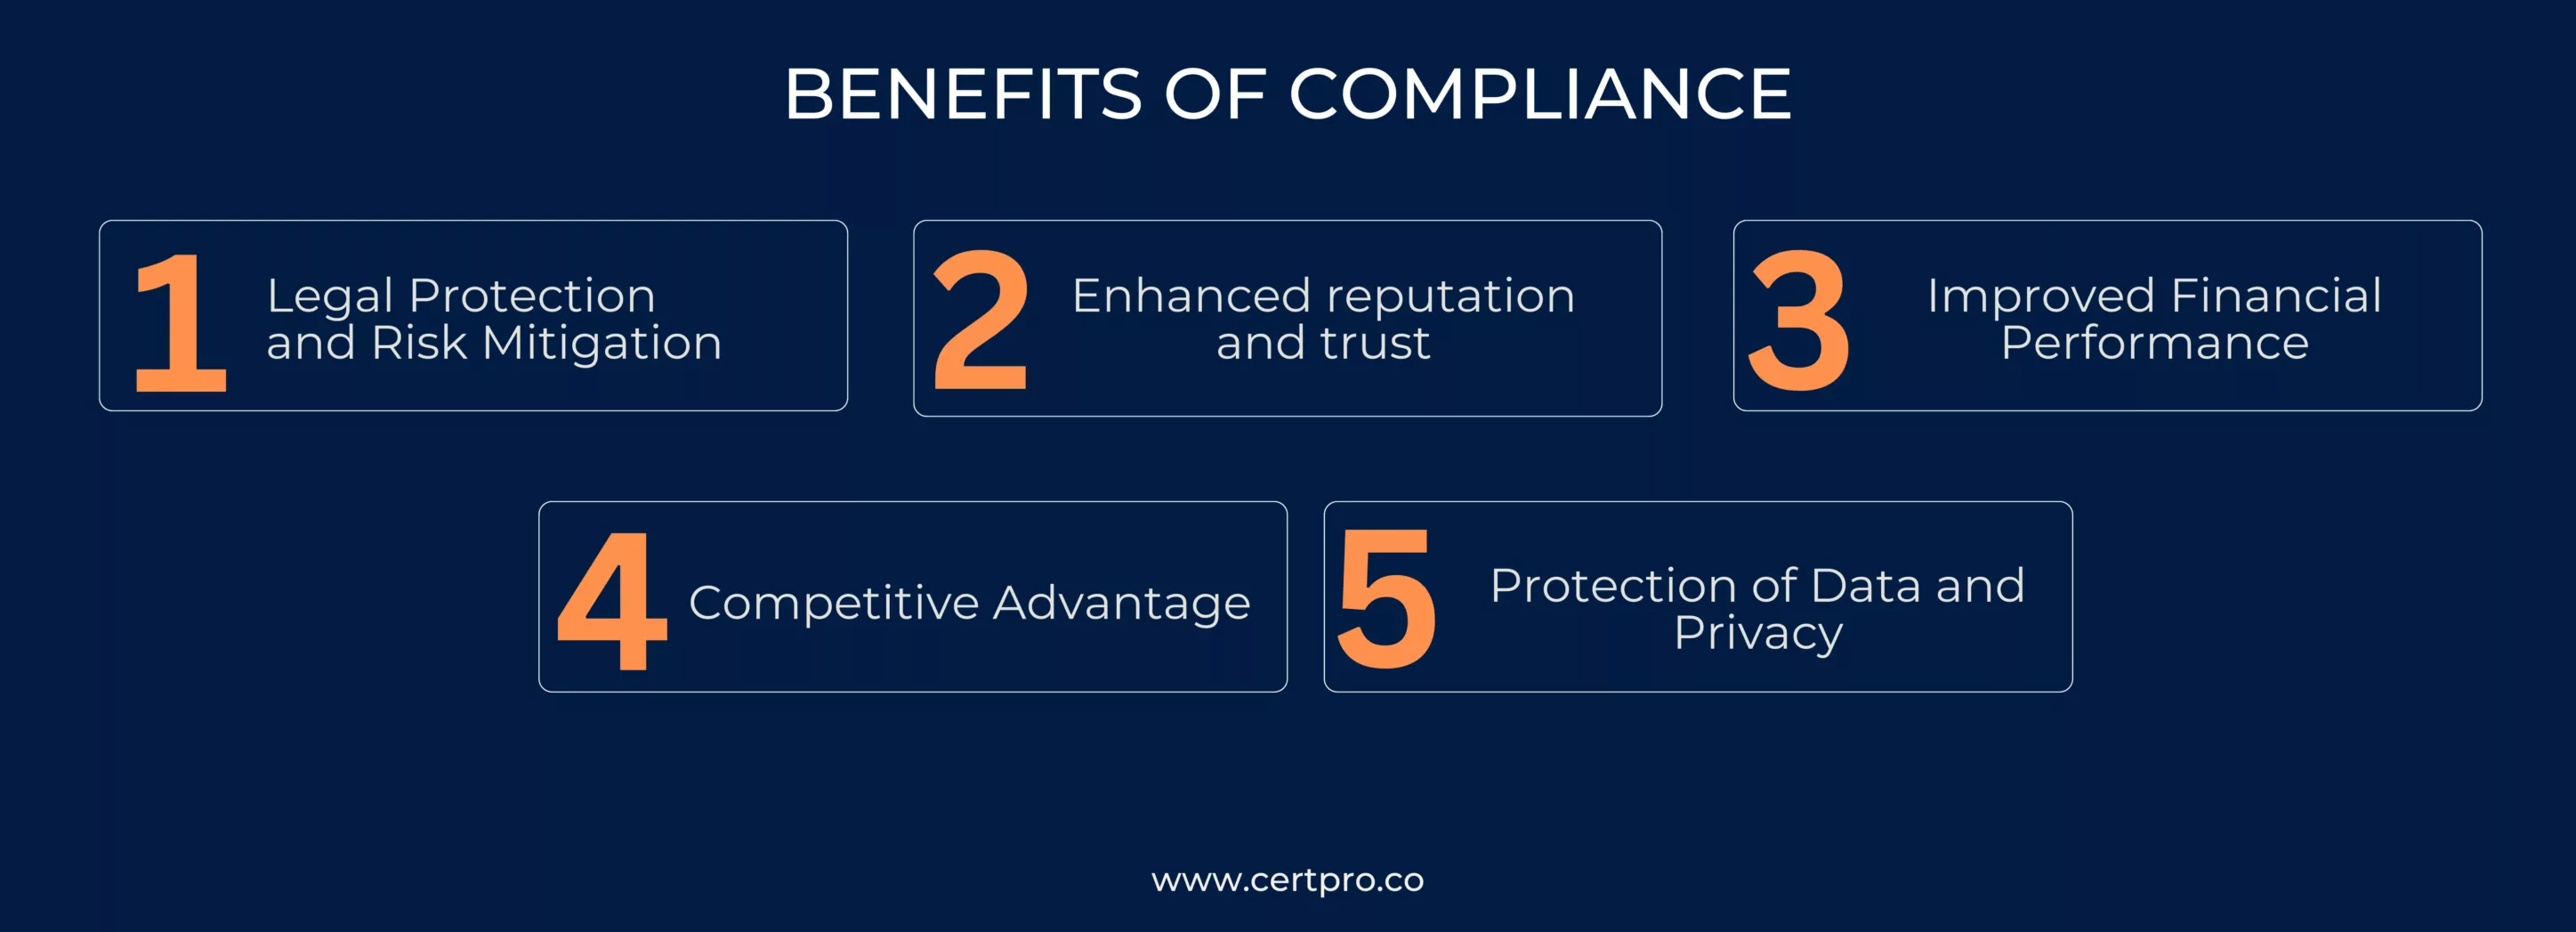 BENEFITS OF COMPLIANCE